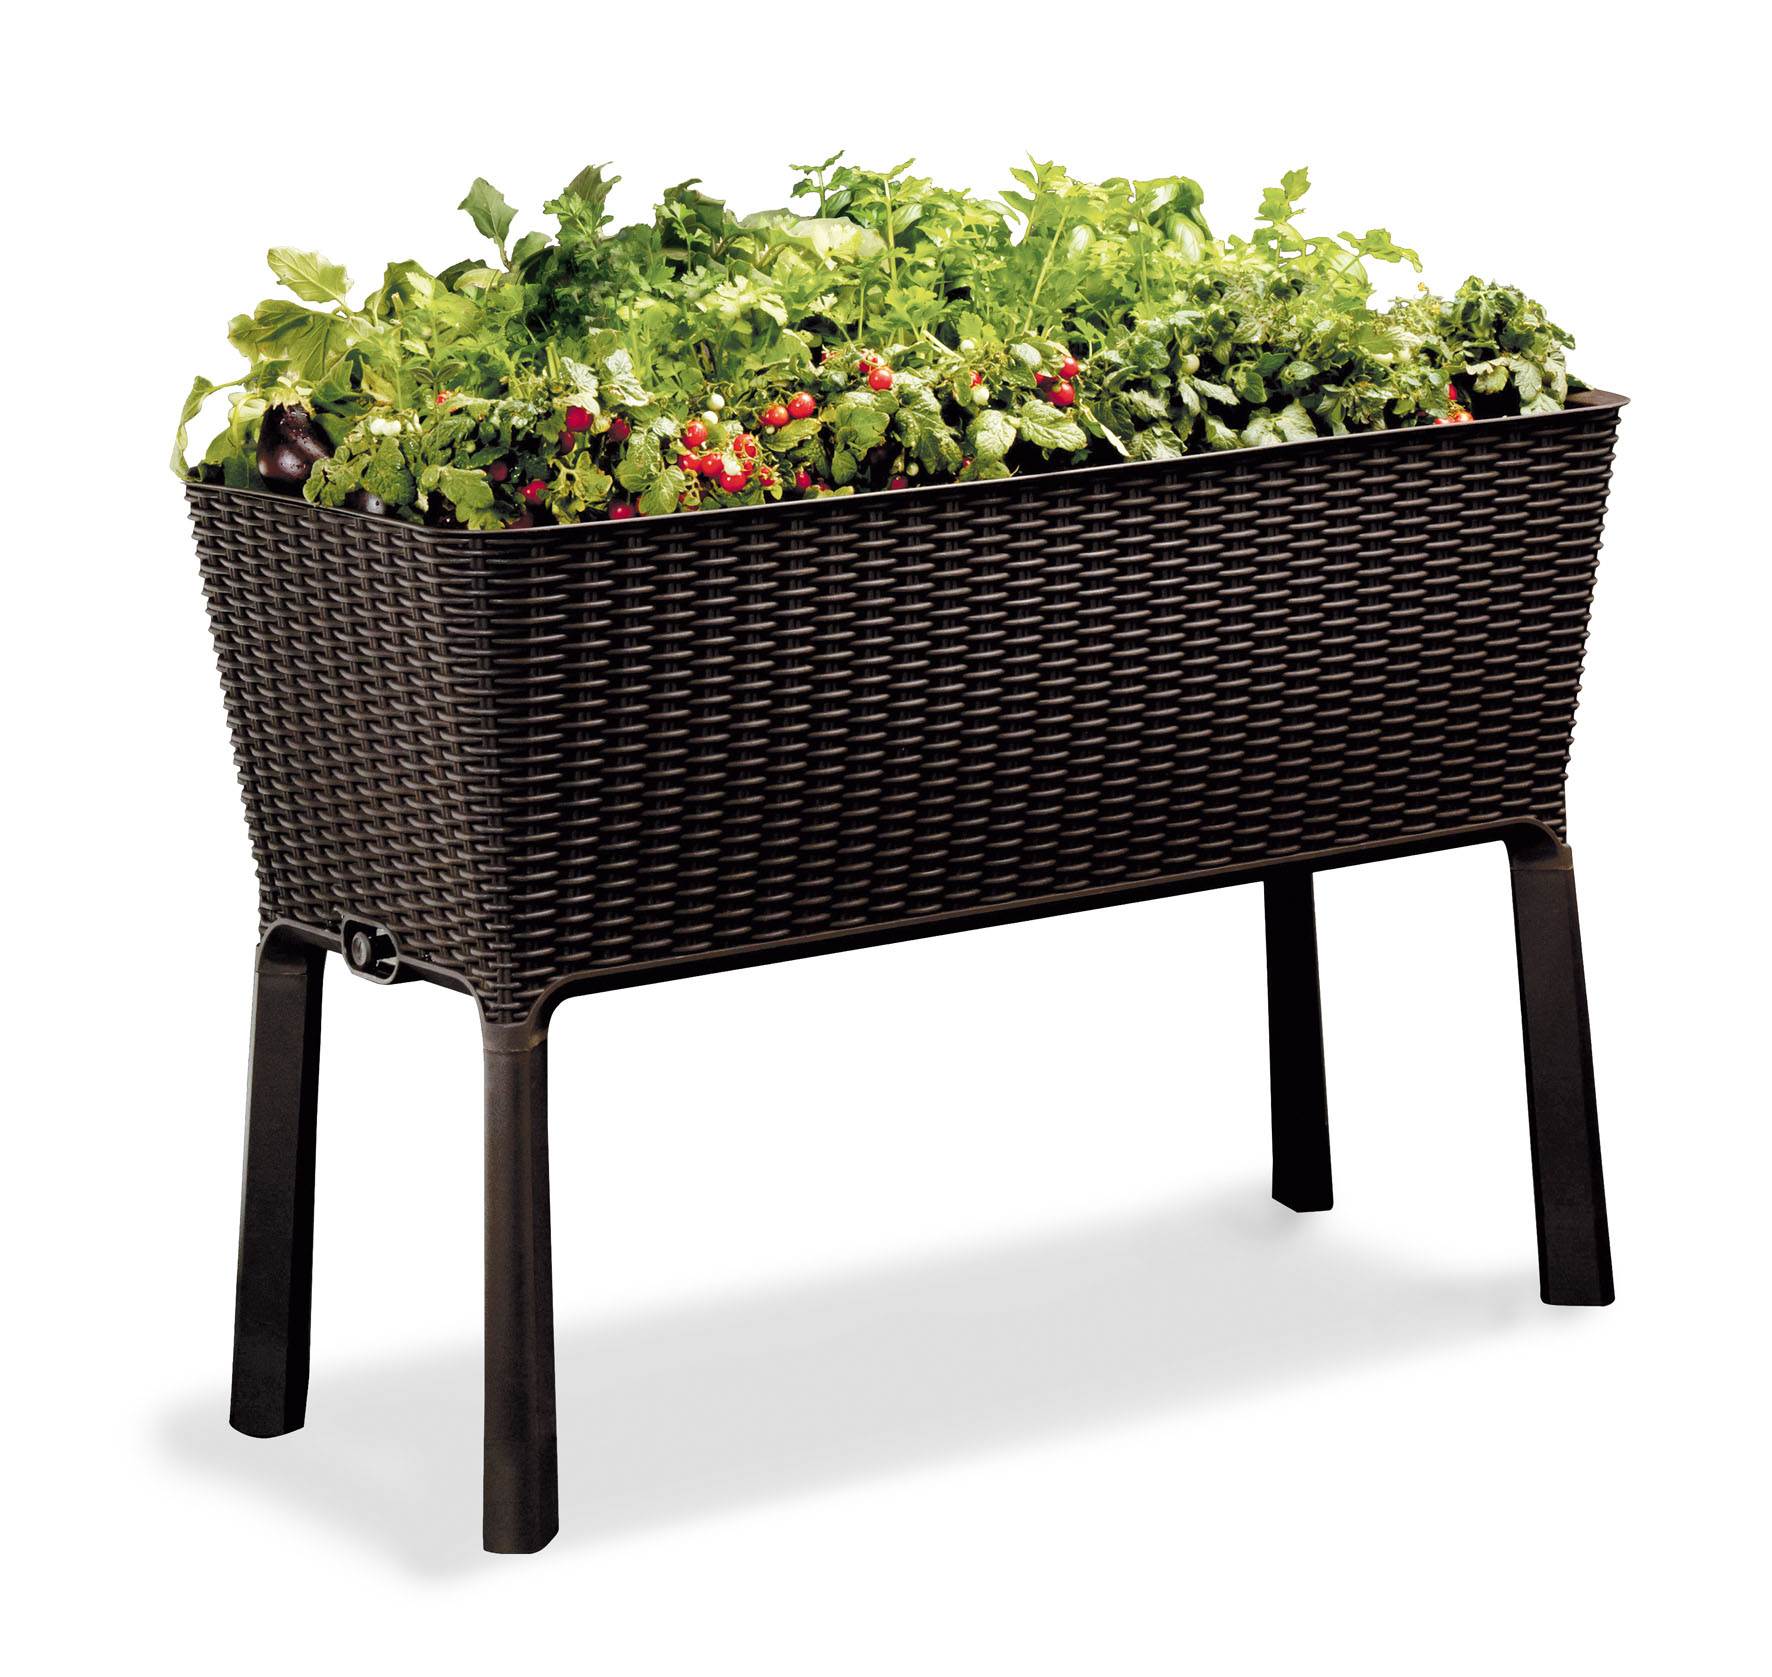 Keter Resin Elevated Garden, All Weather, Self-Watering Plastic Planter, Brown Rattan - image 2 of 18